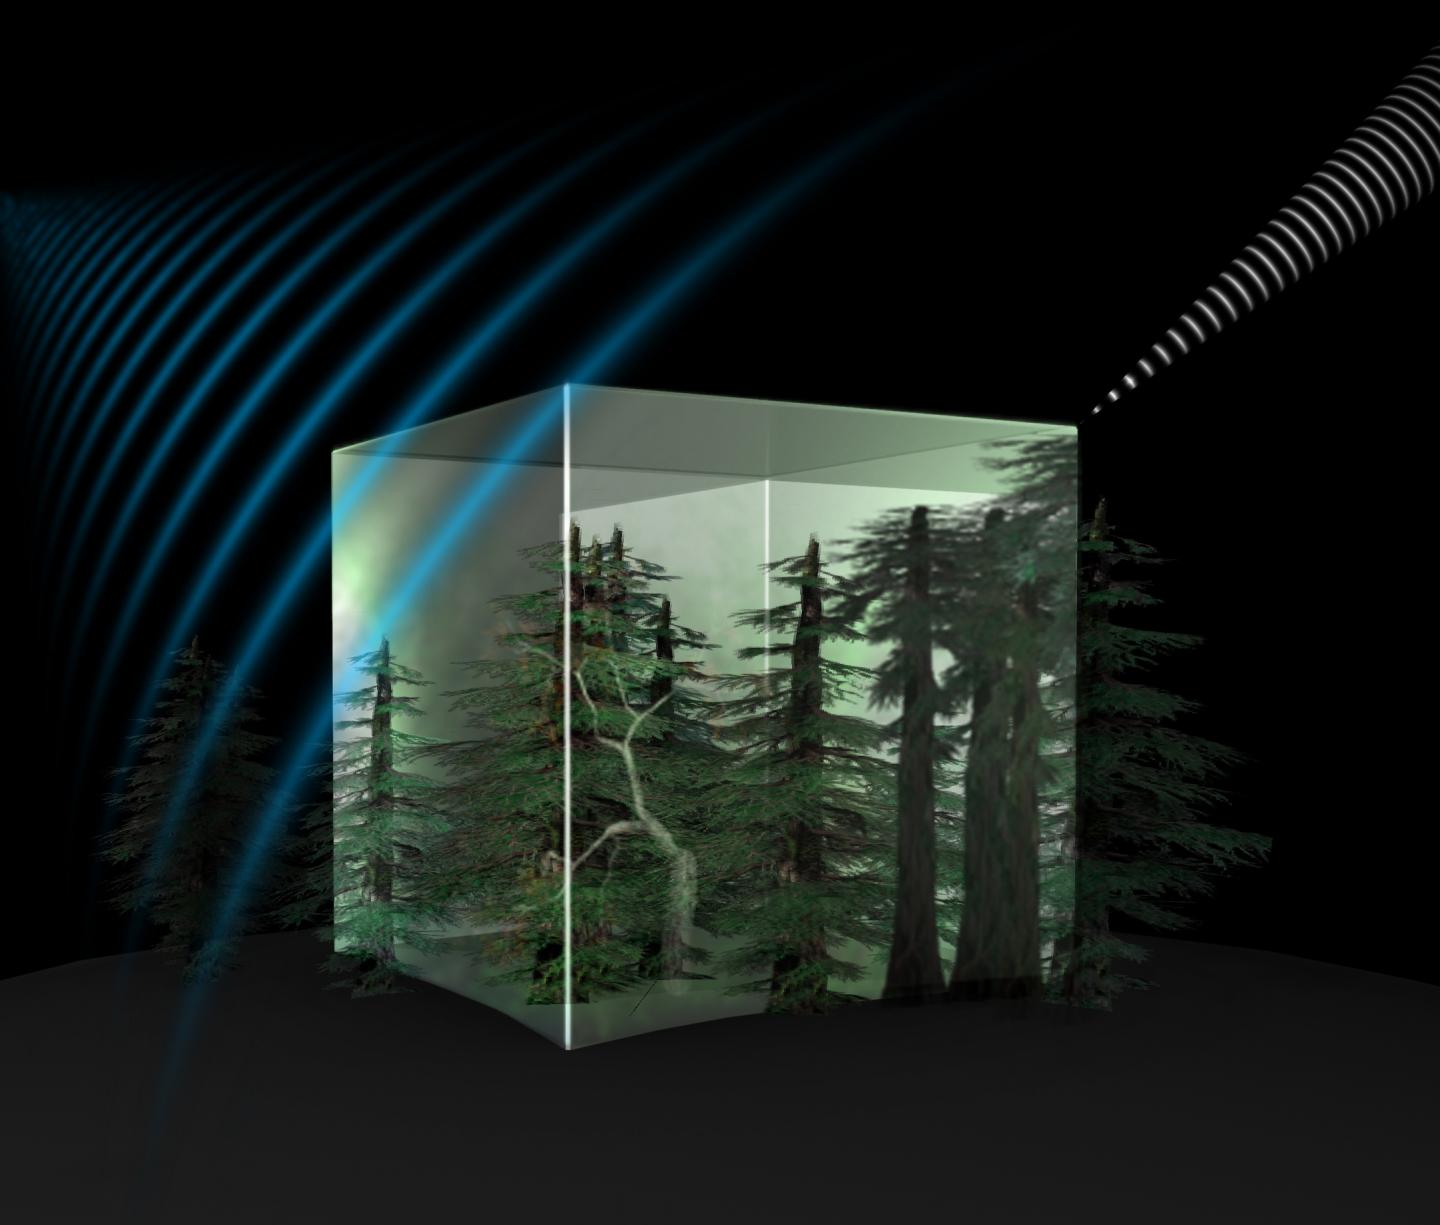 Optical Measurement Technology To Increase Forestry Effectiveness